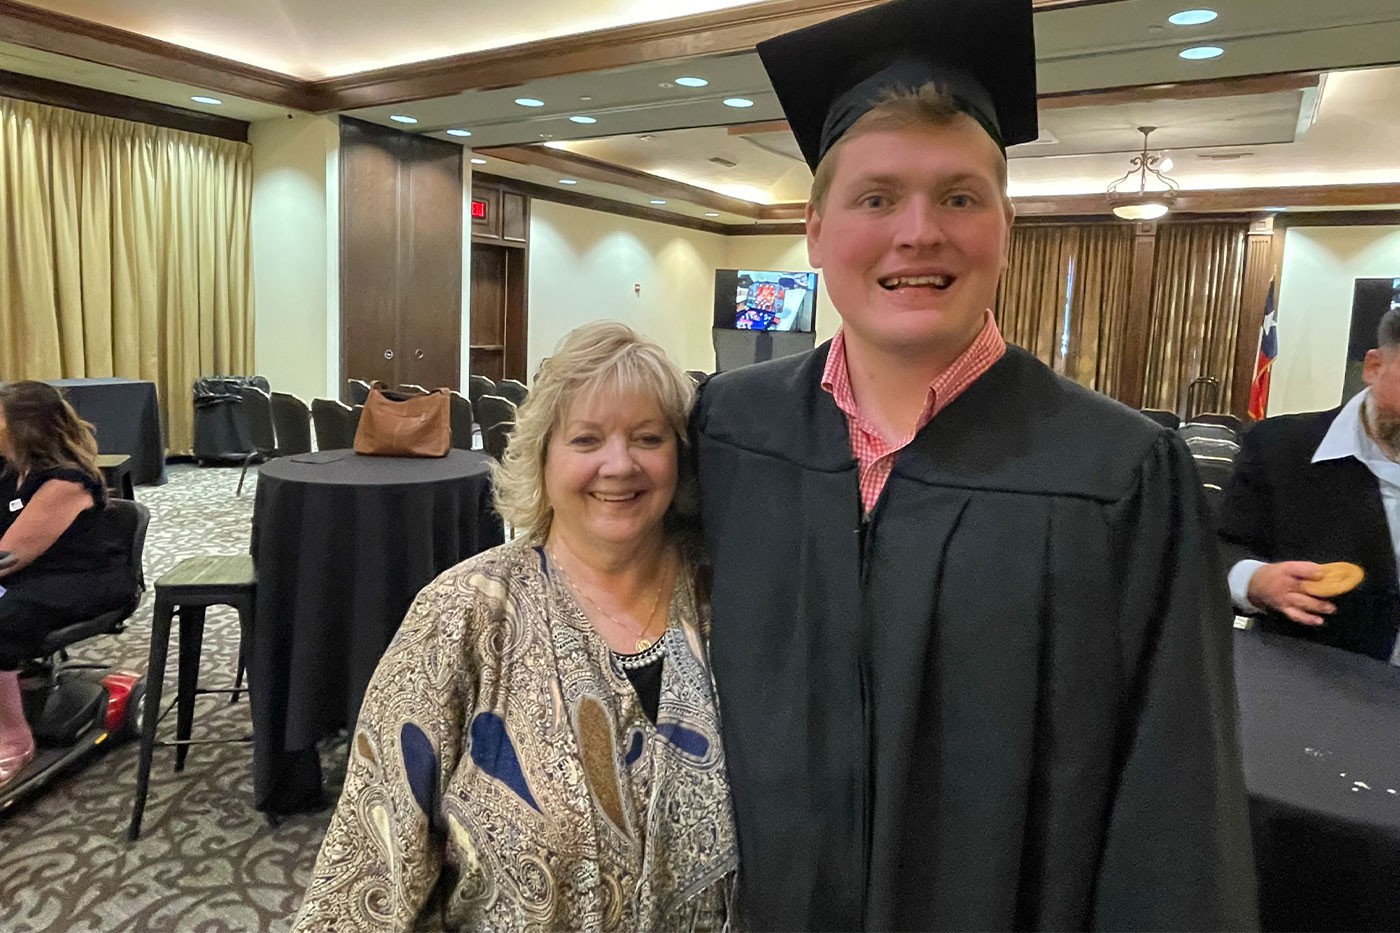 Janice Magness with Jackson at graduation